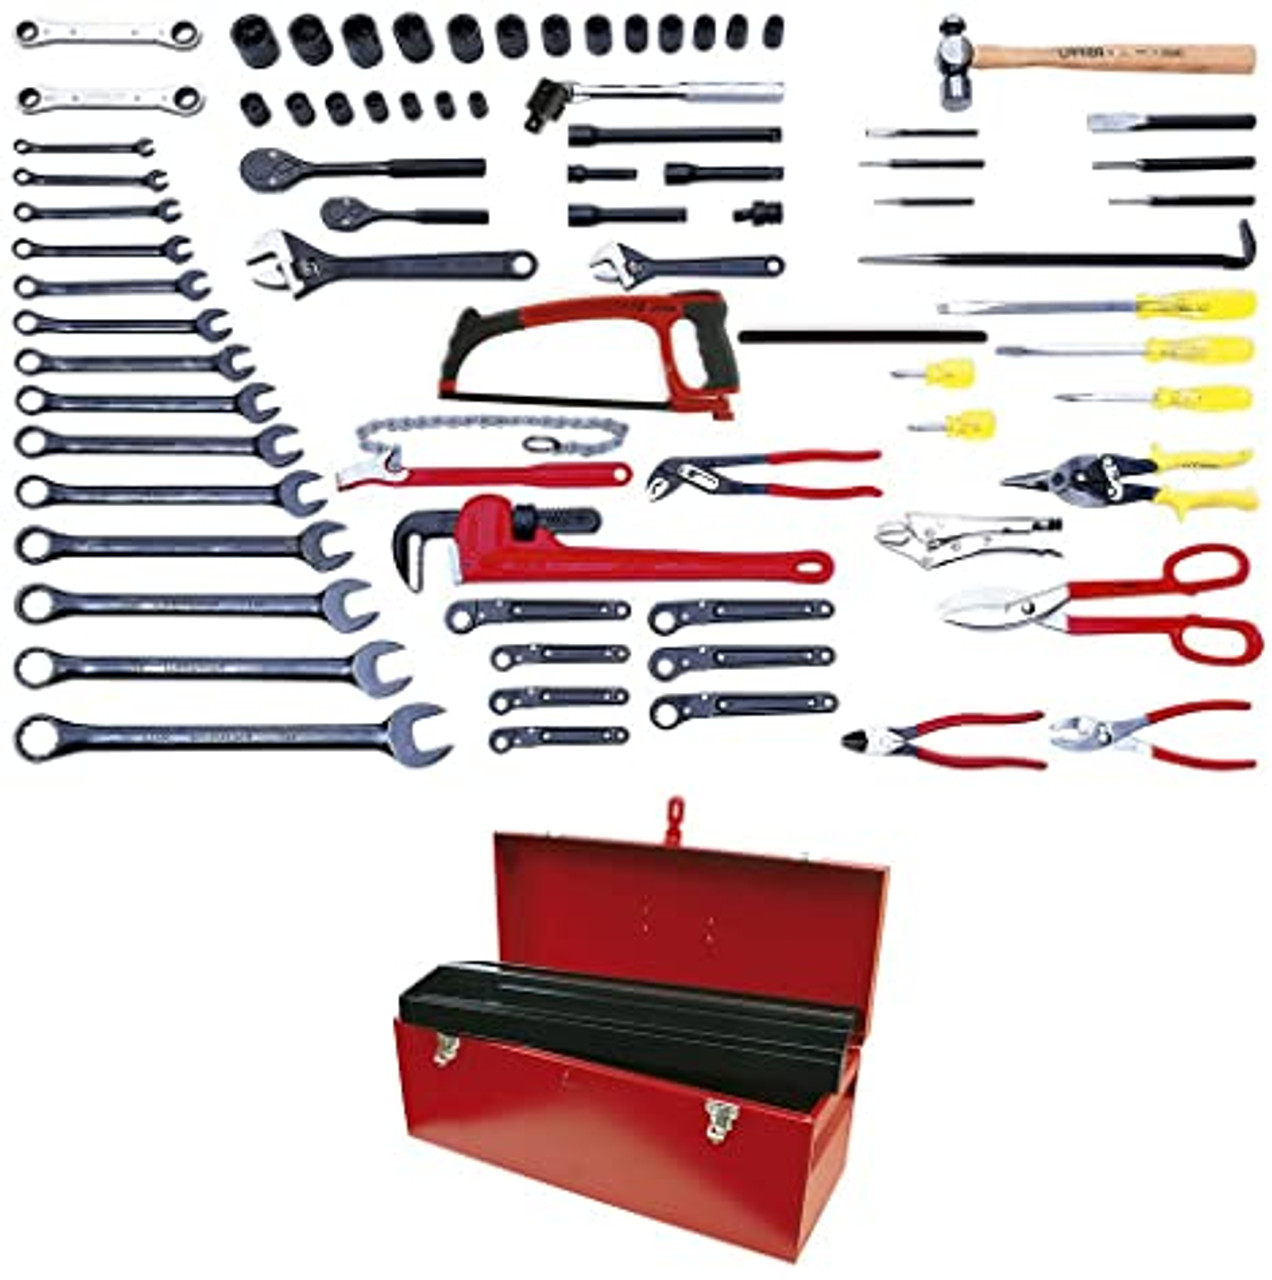 URREA 77 pc railroad maintenance industrial sets with toolbox #98131